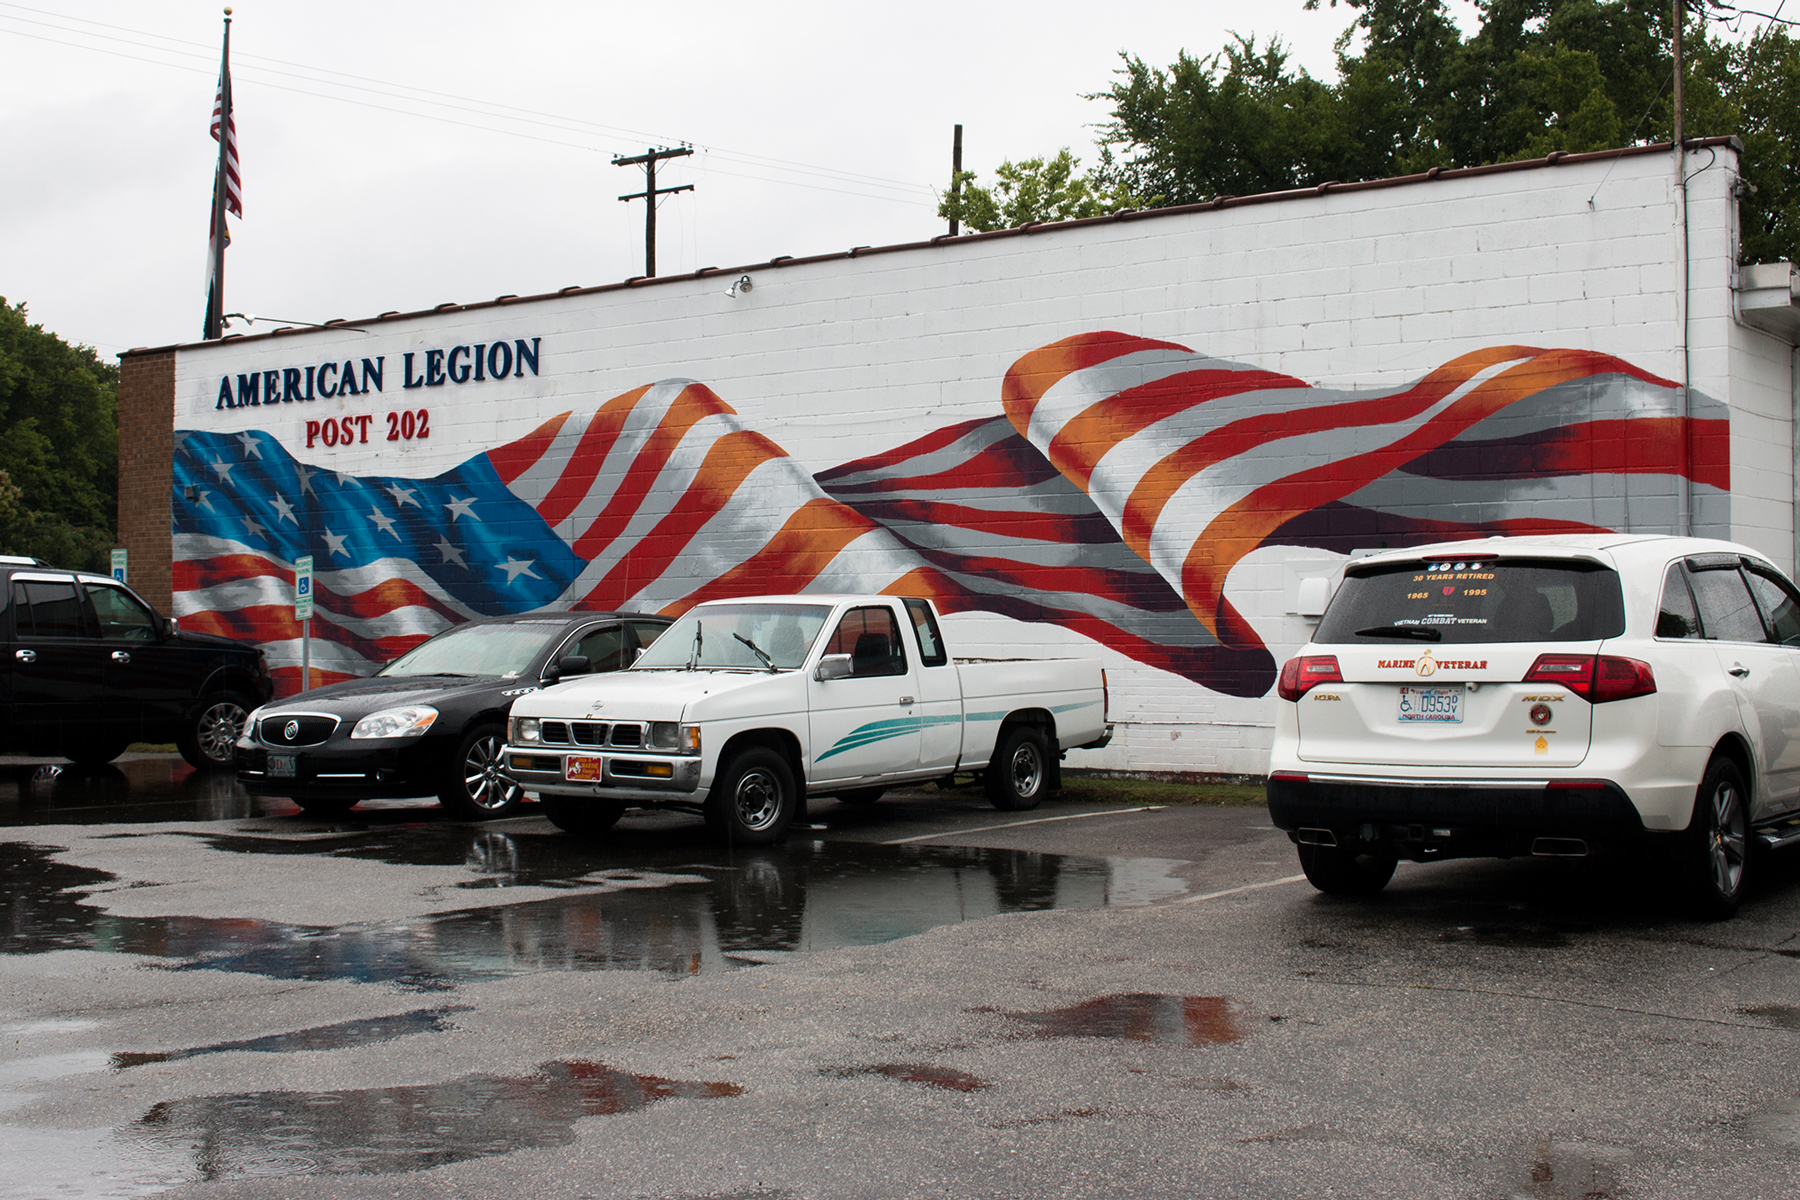 This American flag mural at American Legion Post 202 in Fayetteville gained national notoriety when it was featured in a segment on the “Steve Harvey” show.  (Michael Olinger/News21)